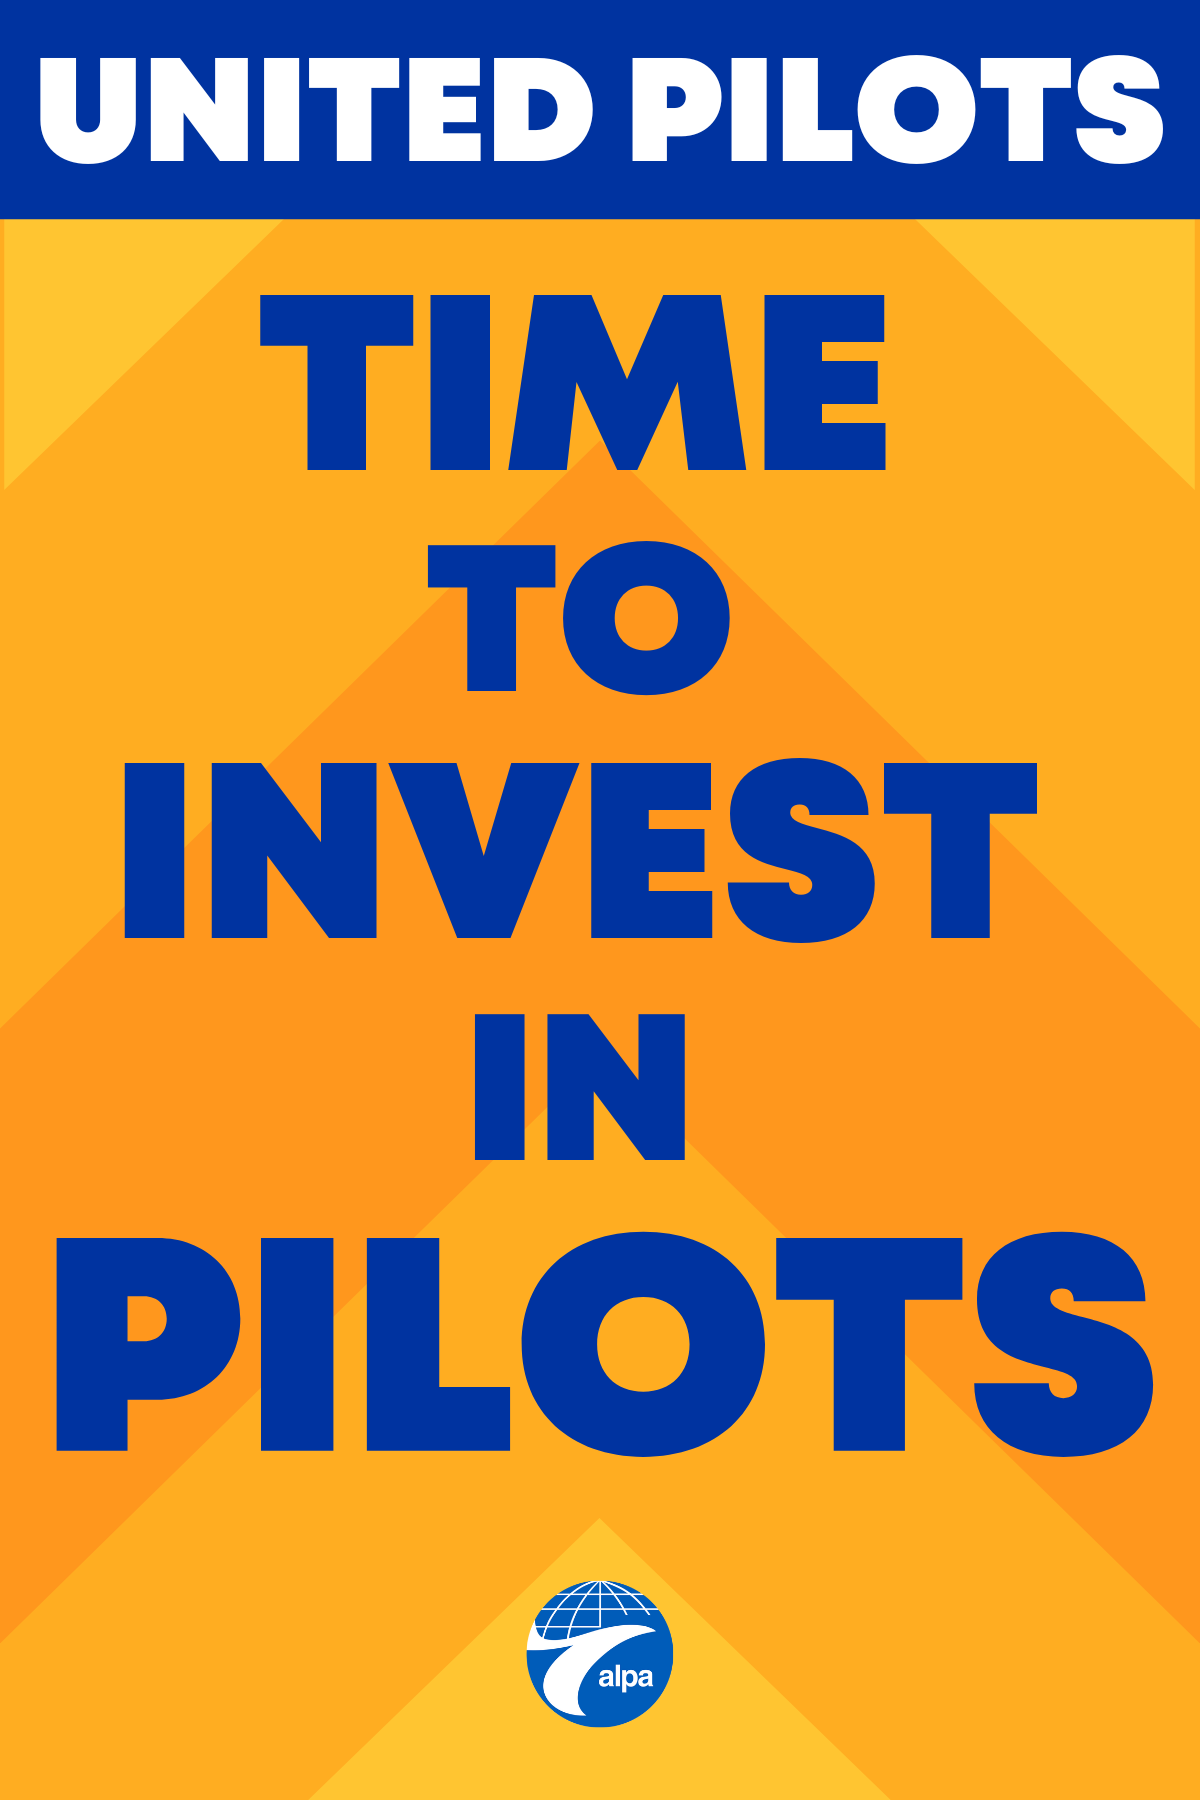 Time to Invest in Pilots picket sign image